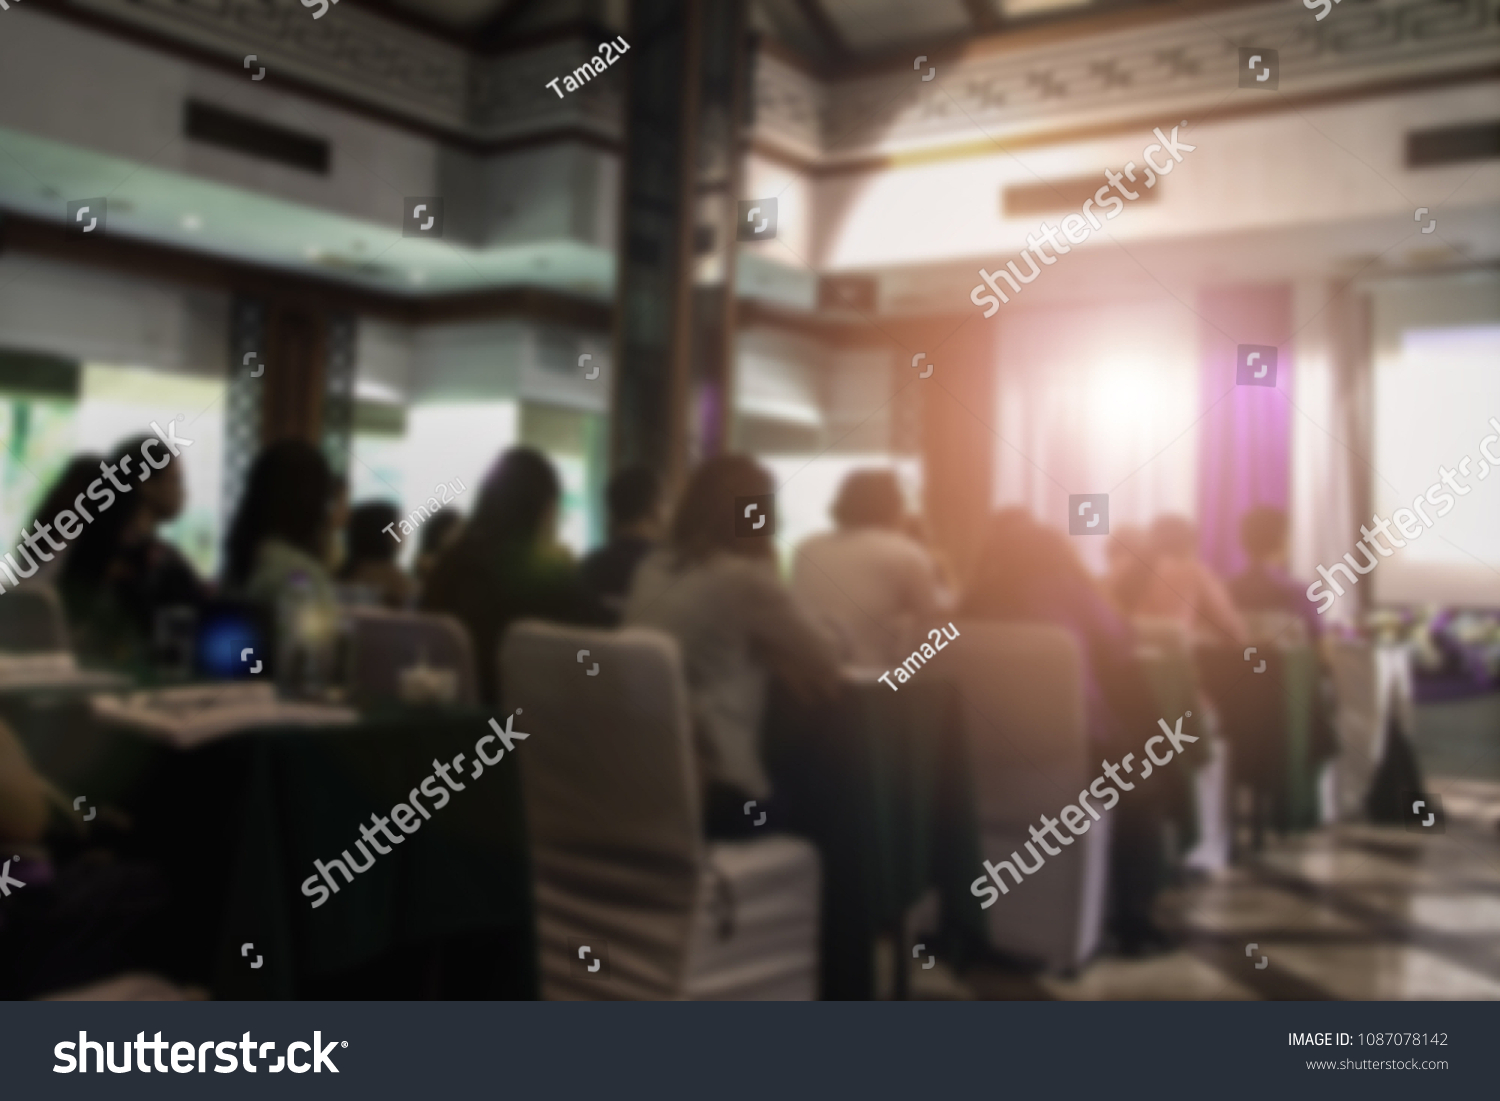 Abstract blurred photo background of business people in conference hall or seminar room.
Bokeh business meeting conference training learning coaching concept. #1087078142